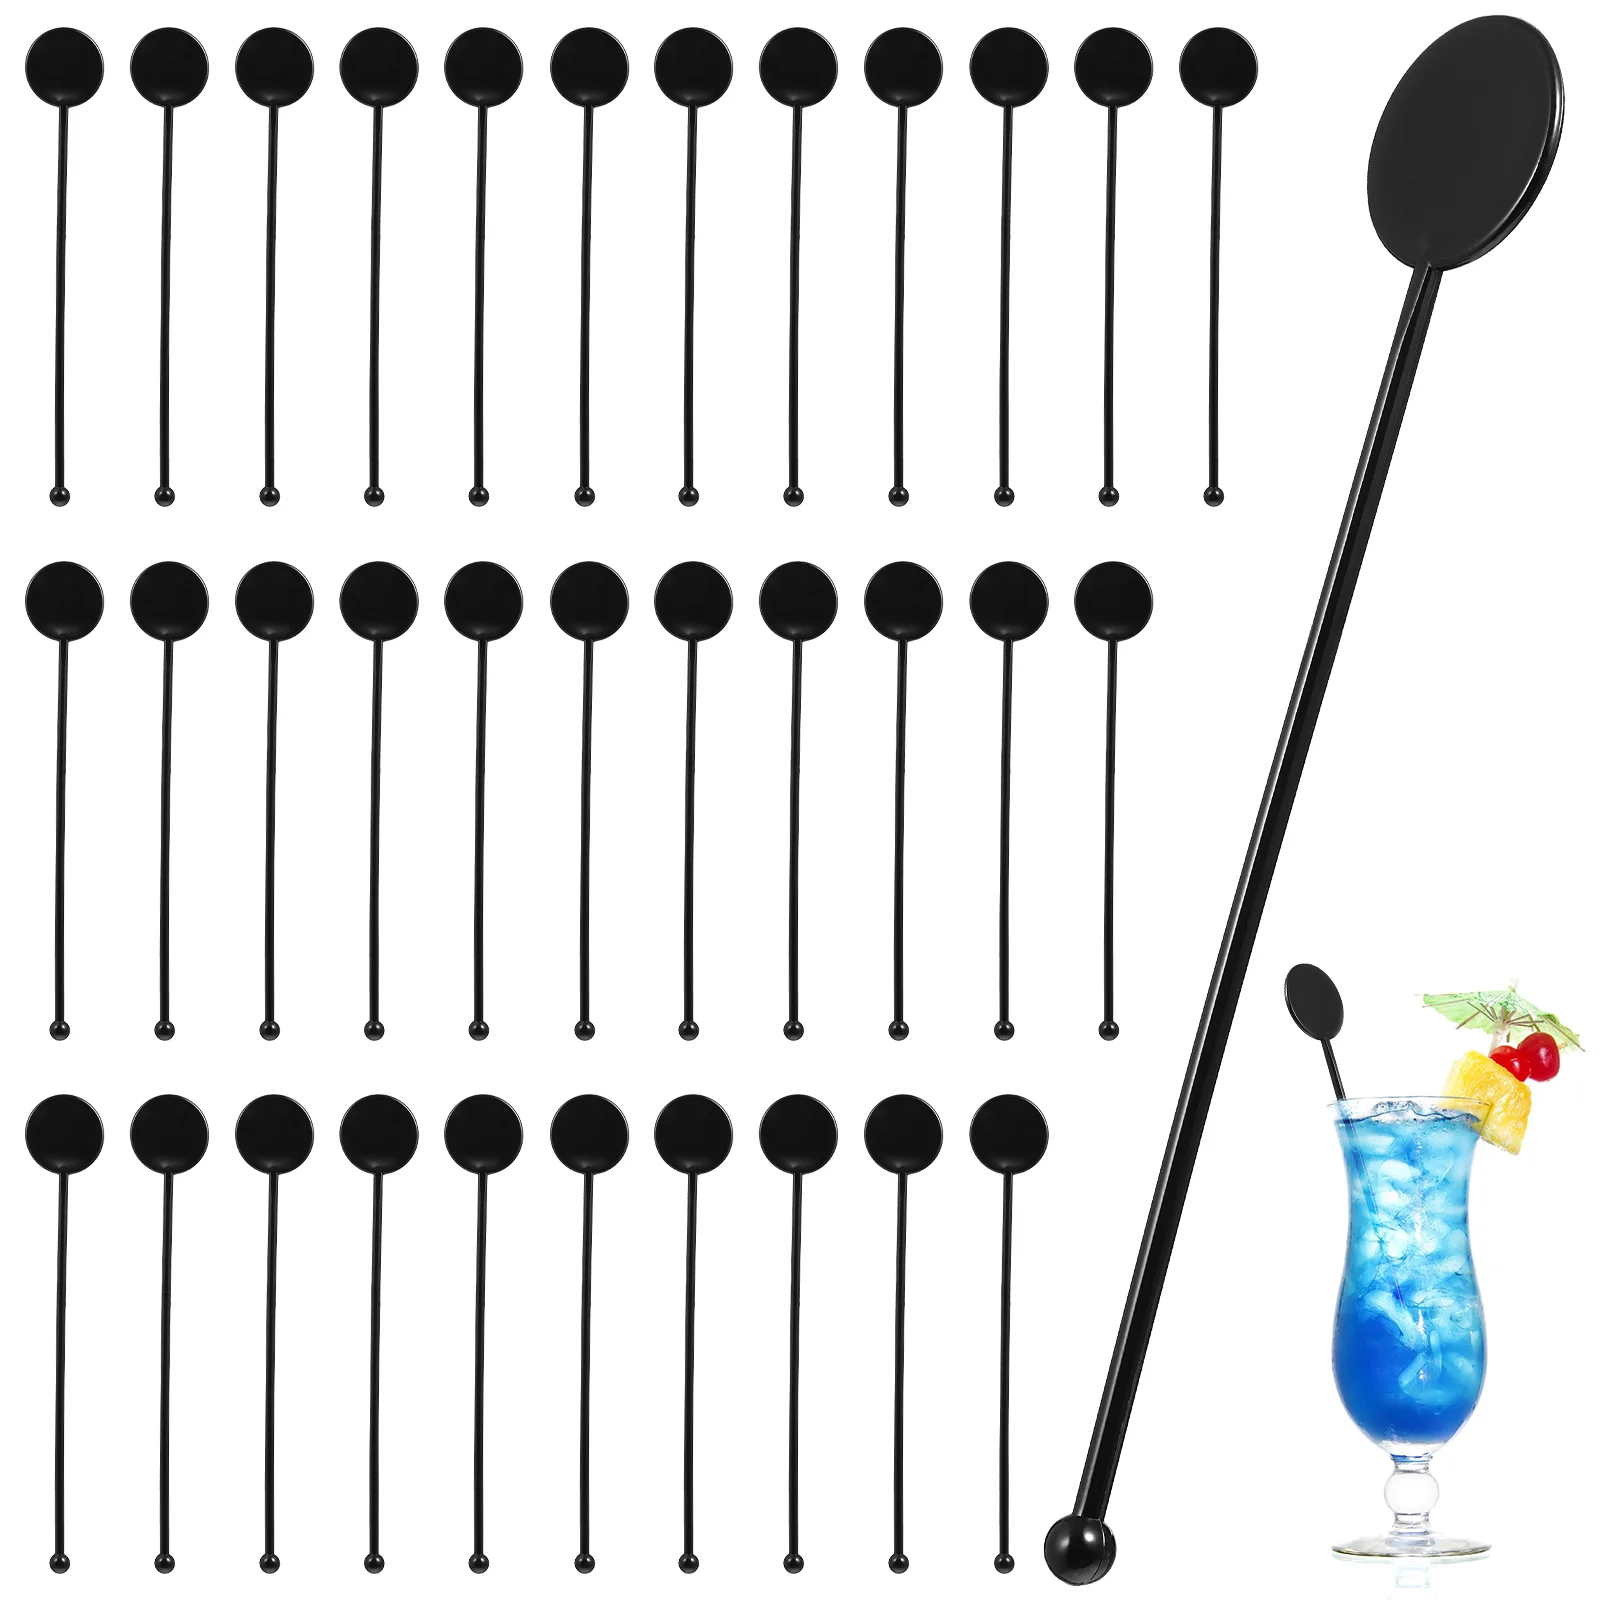 

100 Pcs Cocktail Stirrers Coffee Blender Frother Drinks Mixing Sticks Mixer Beverage Rods Stirring Decorate Swizzle Cocktails